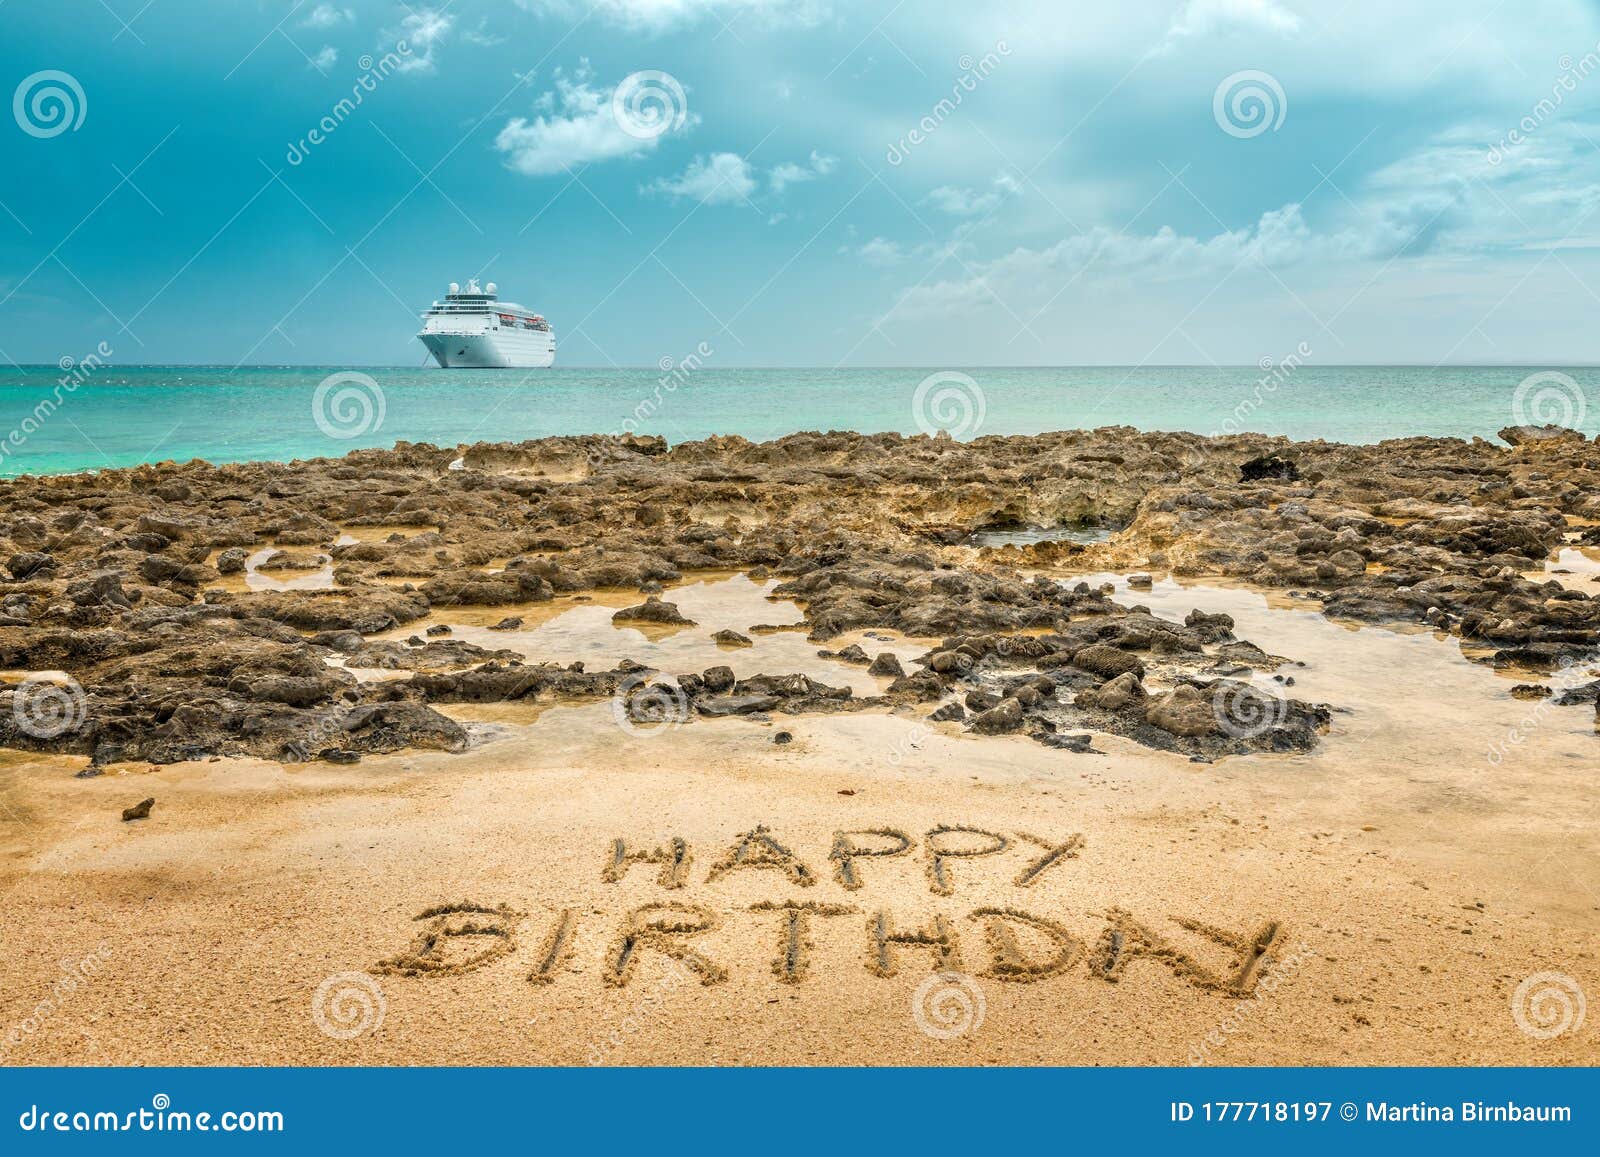 2 131 Happy Birthday Beach Background Photos Free Royalty Free Stock Photos From Dreamstime